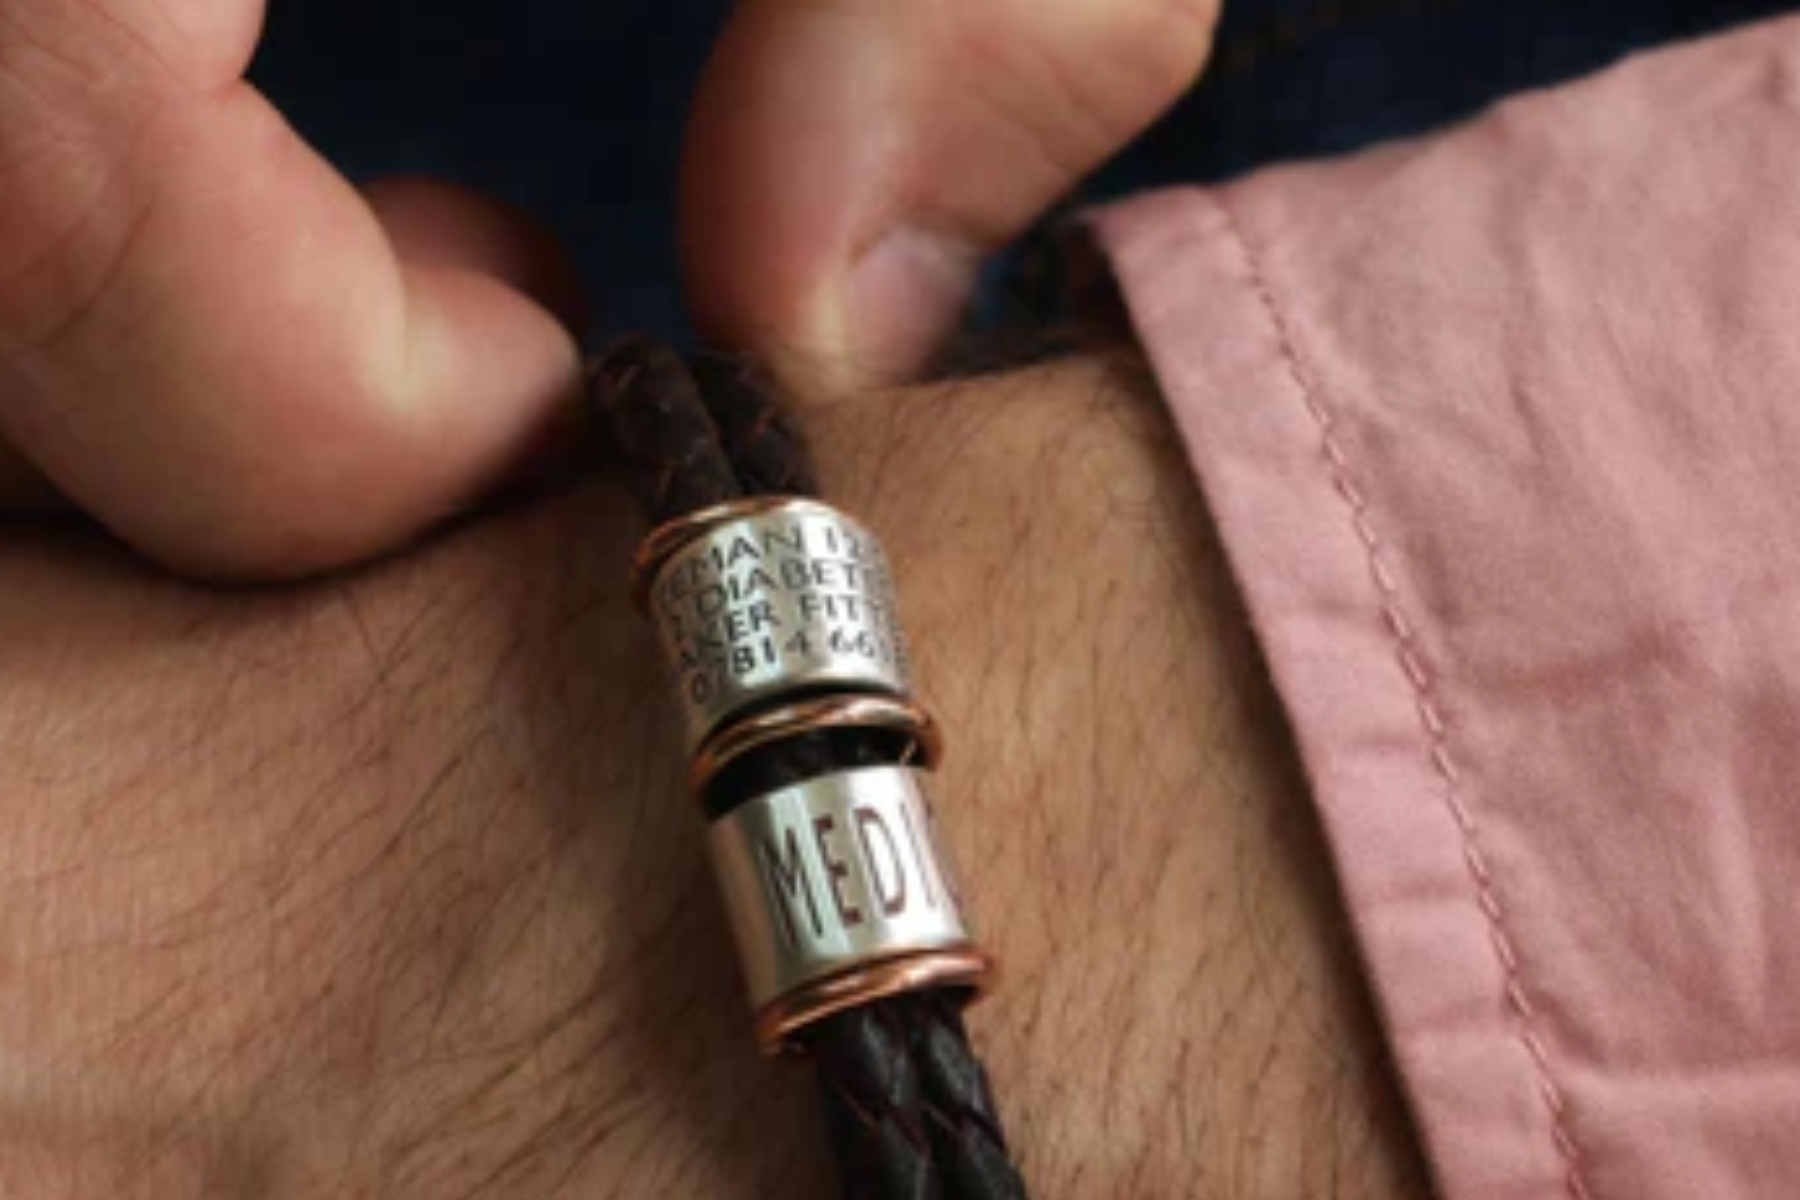 A medical alert bracelet on the wrist of a person